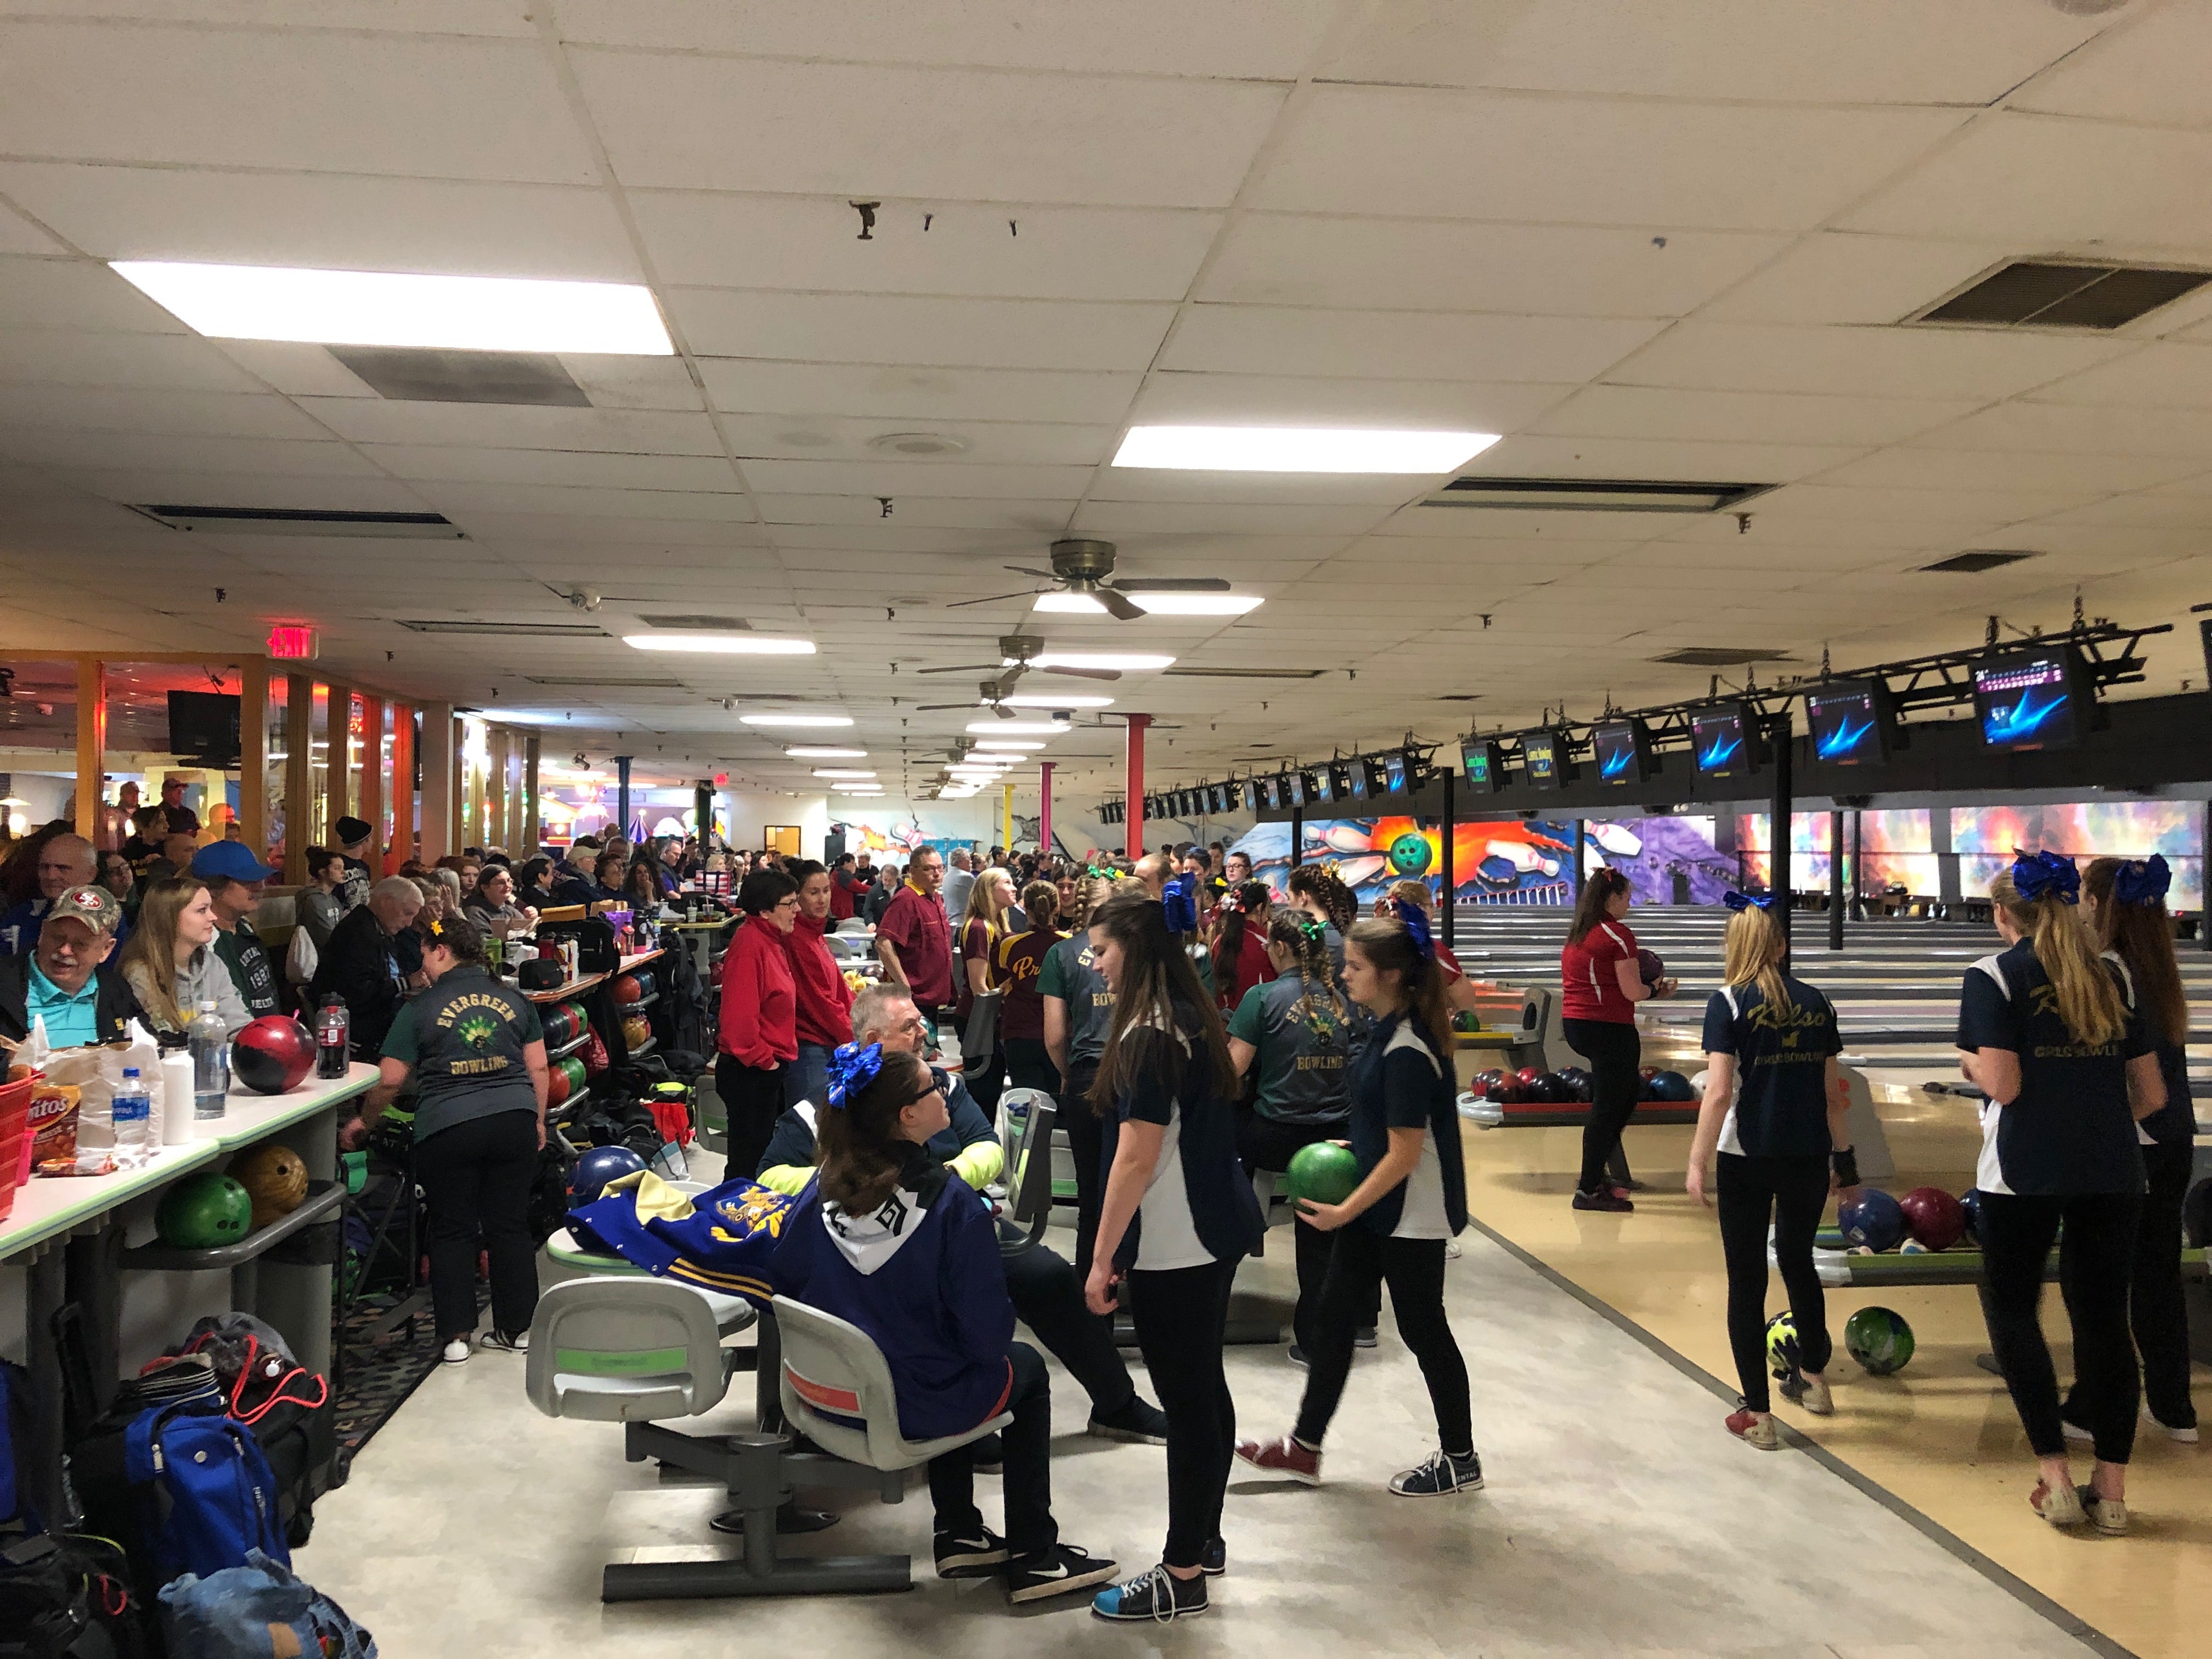 3A and 4A schools participate in the district bowling tournament at Crosley Lanes on Friday.